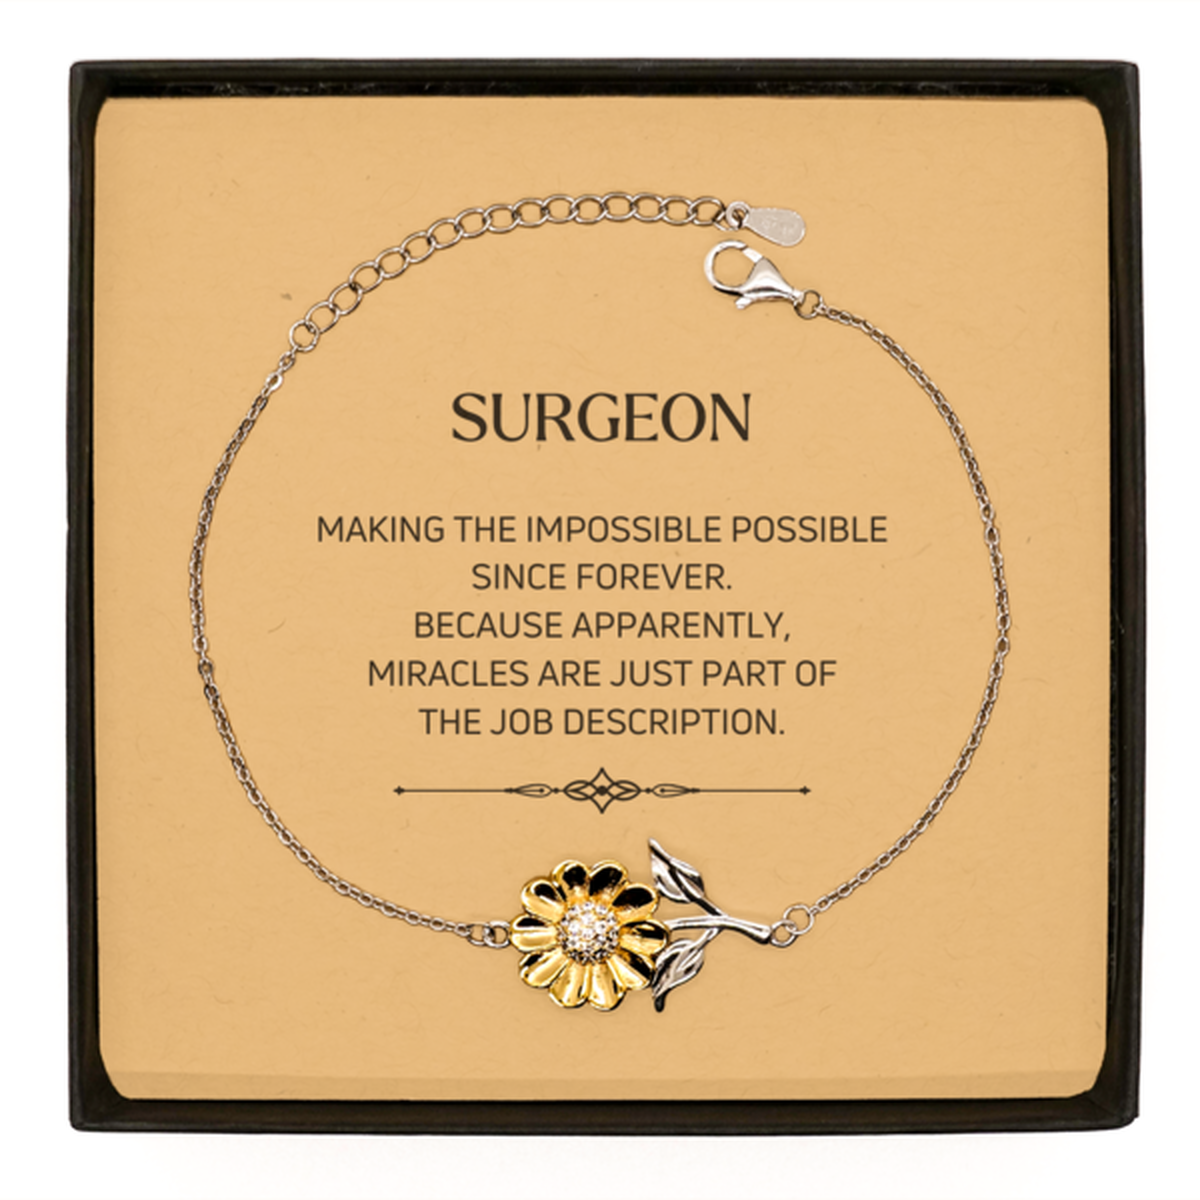 Funny Surgeon Gifts, Miracles are just part of the job description, Inspirational Birthday Sunflower Bracelet For Surgeon, Men, Women, Coworkers, Friends, Boss